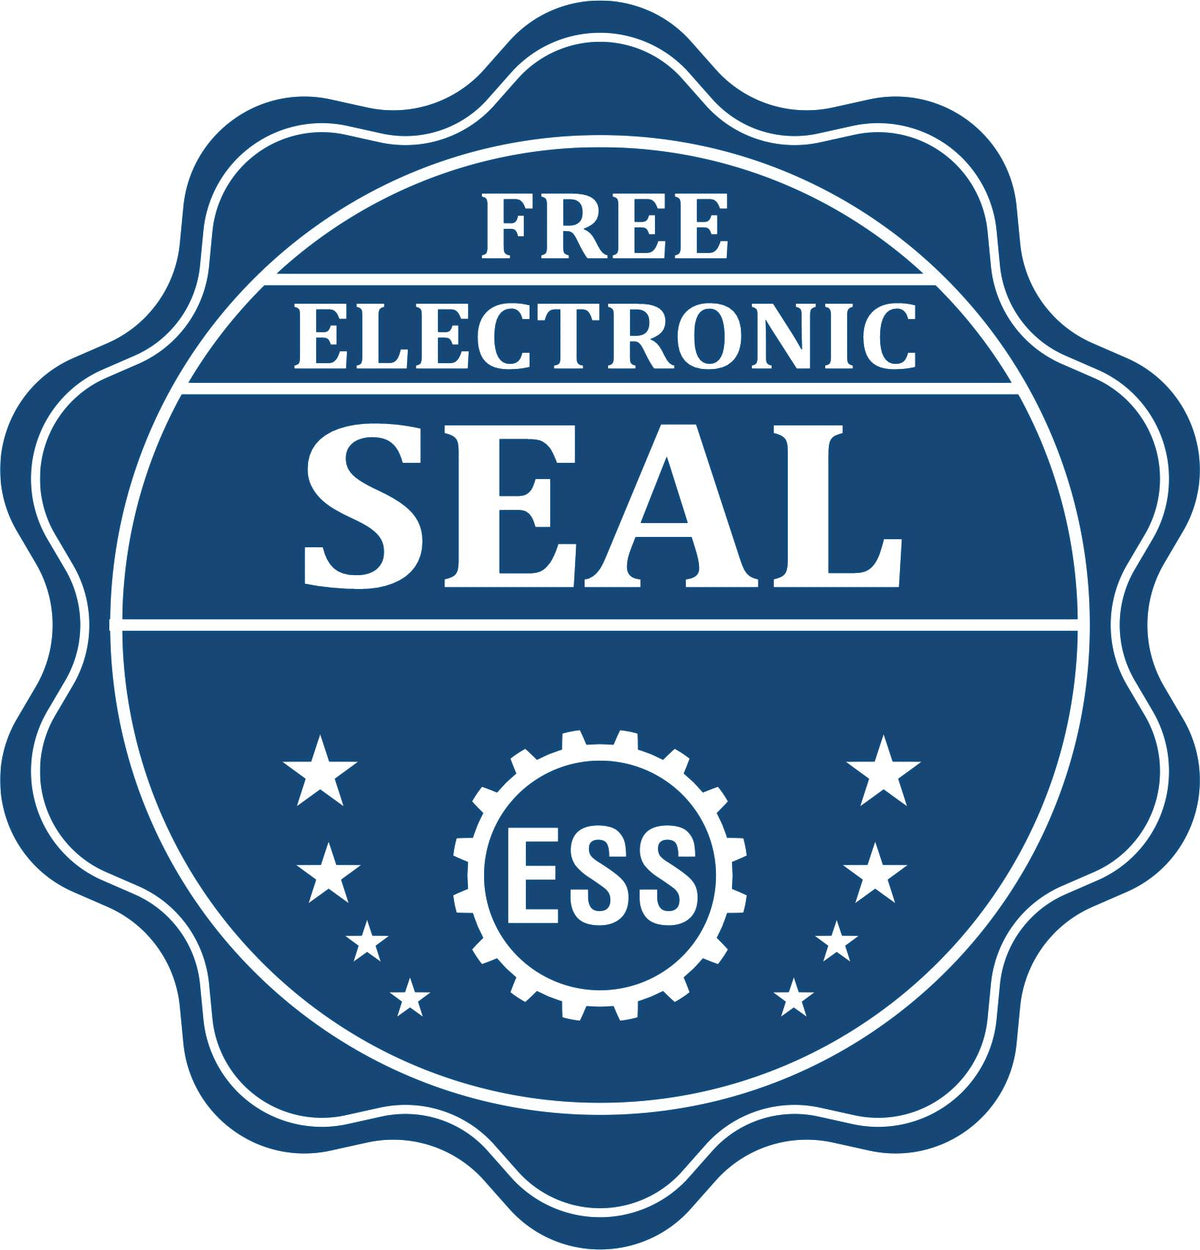 A badge showing a free electronic seal for the Heavy Duty Cast Iron Pennsylvania Architect Embosser with stars and the ESS gear on the emblem.